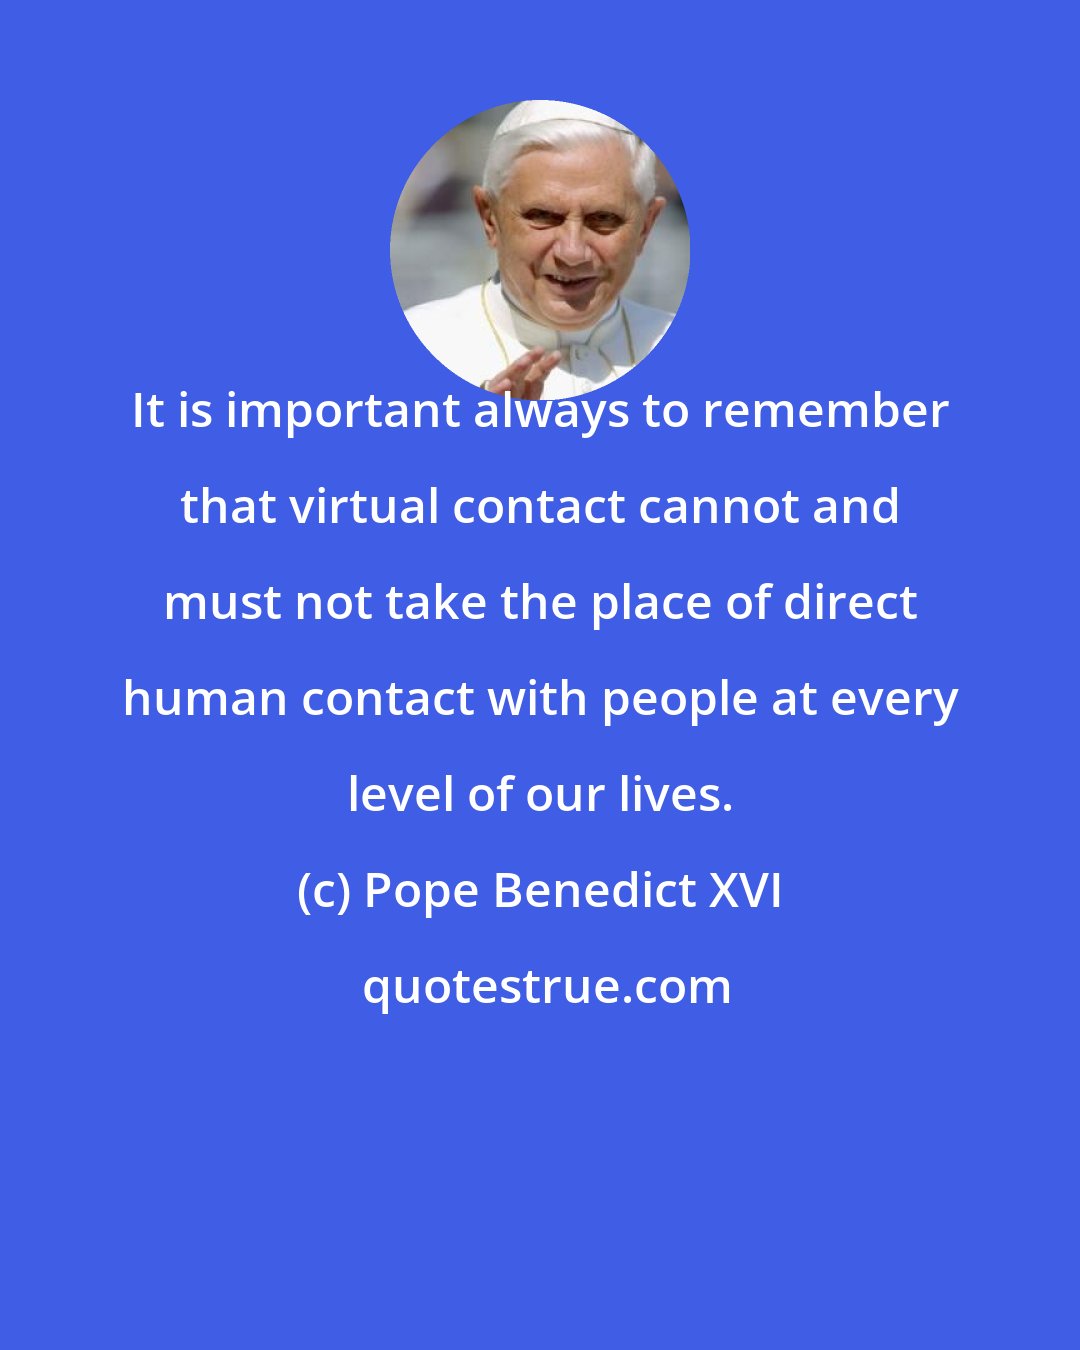 Pope Benedict XVI: It is important always to remember that virtual contact cannot and must not take the place of direct human contact with people at every level of our lives.